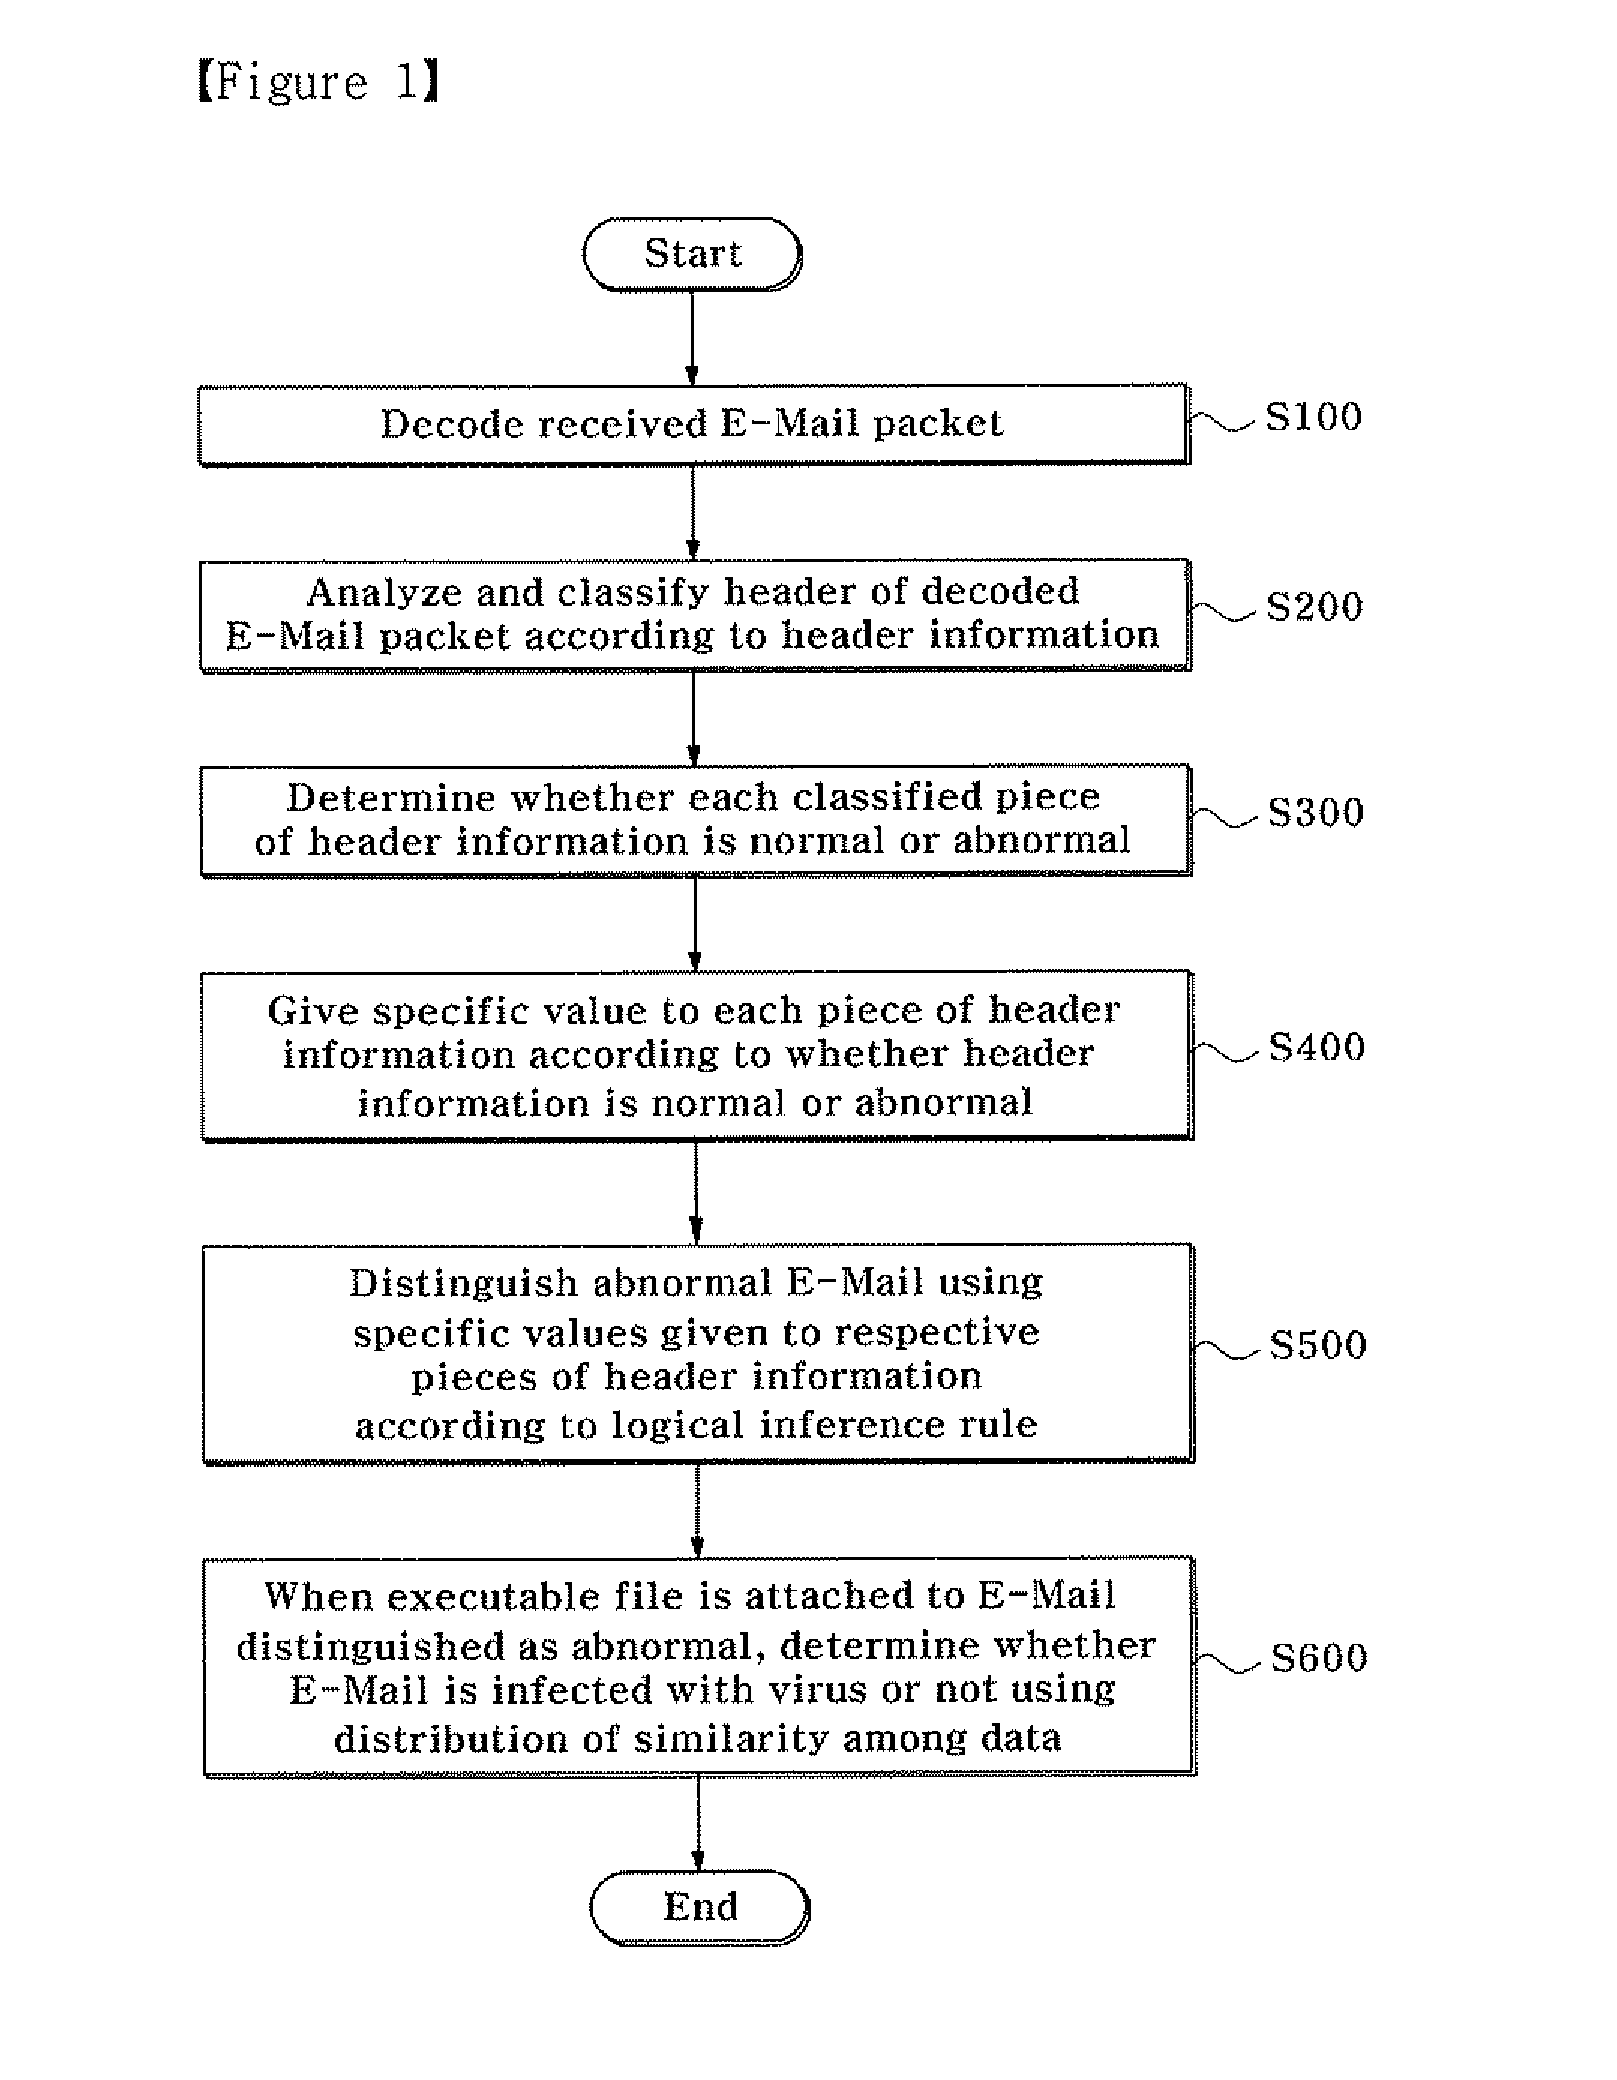 Method for Inferring Maliciousness of Email and Detecting a Virus Pattern